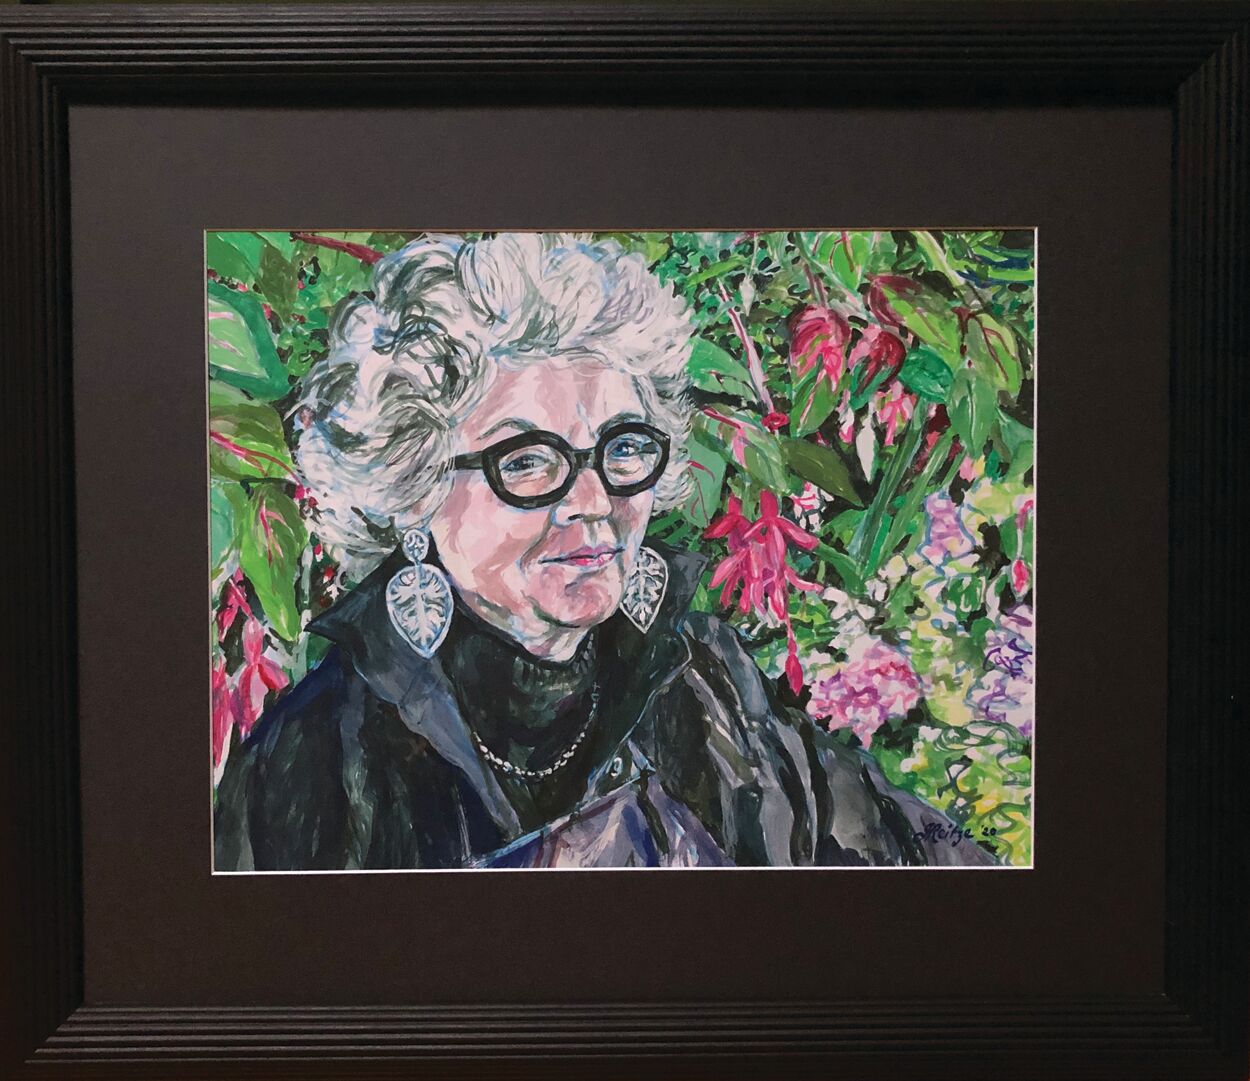 jo-reitze-self-portrait-with-iso-curls-and-my-painting-framed